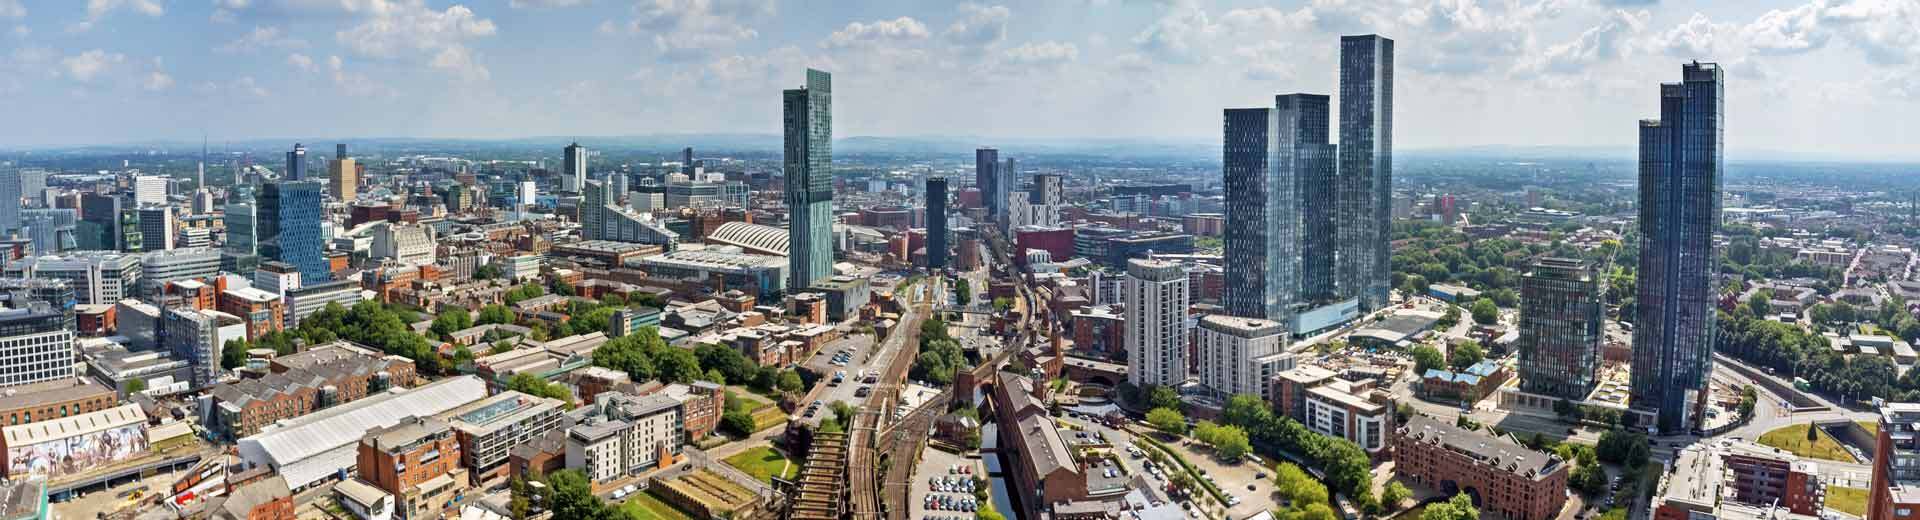 Aerial view of Manchester, with skyscrapers towering over red-brick Victorian buildings.